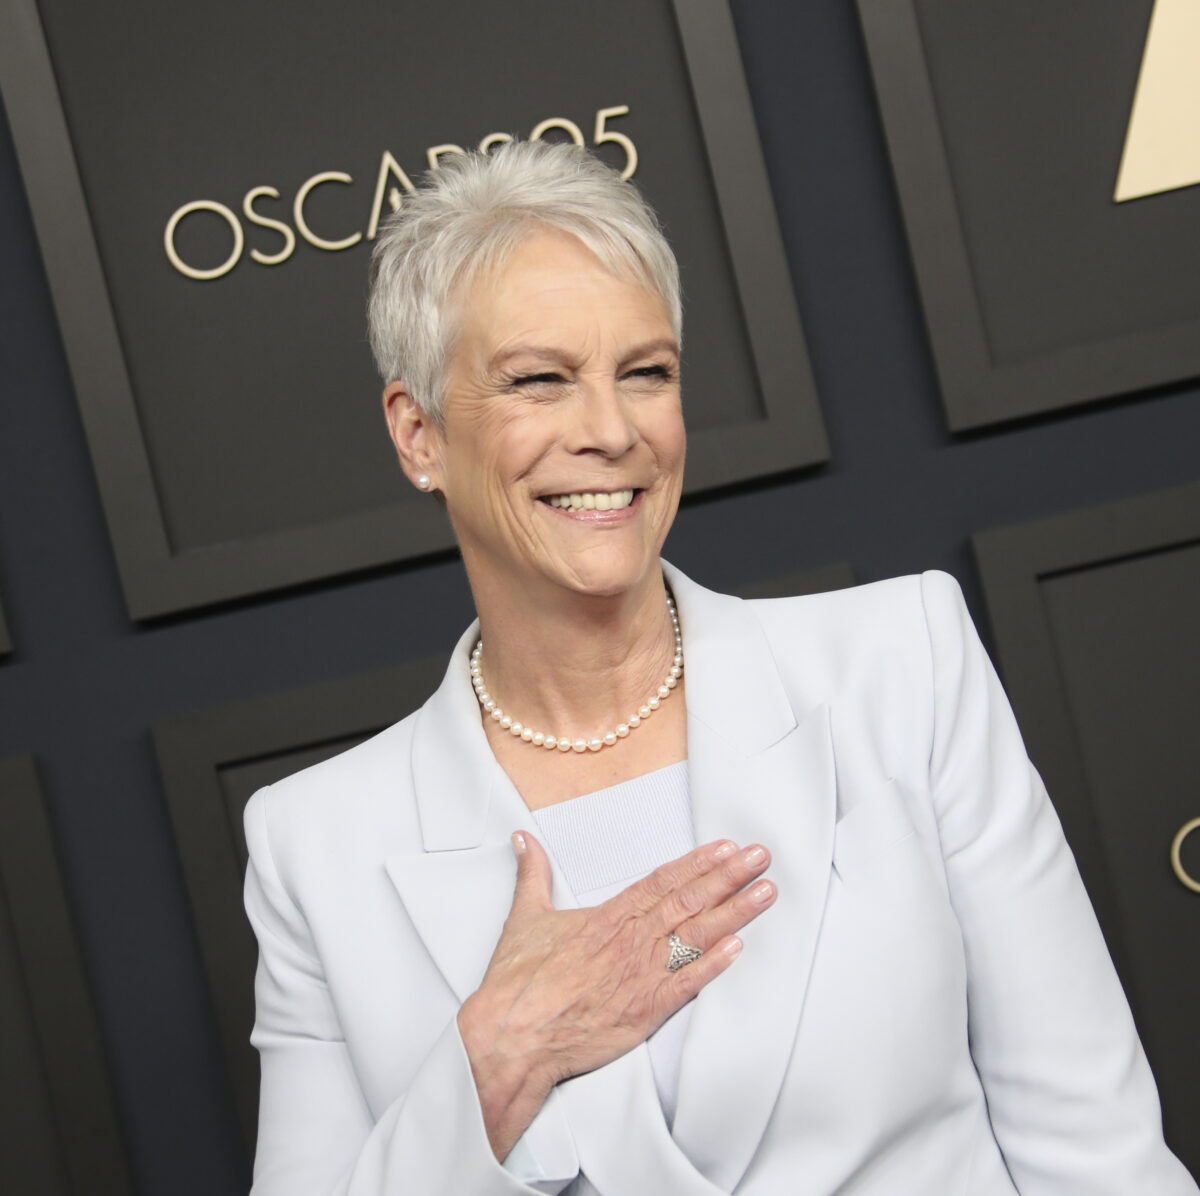 Jamie Lee Curtis’ awards history at the Oscars